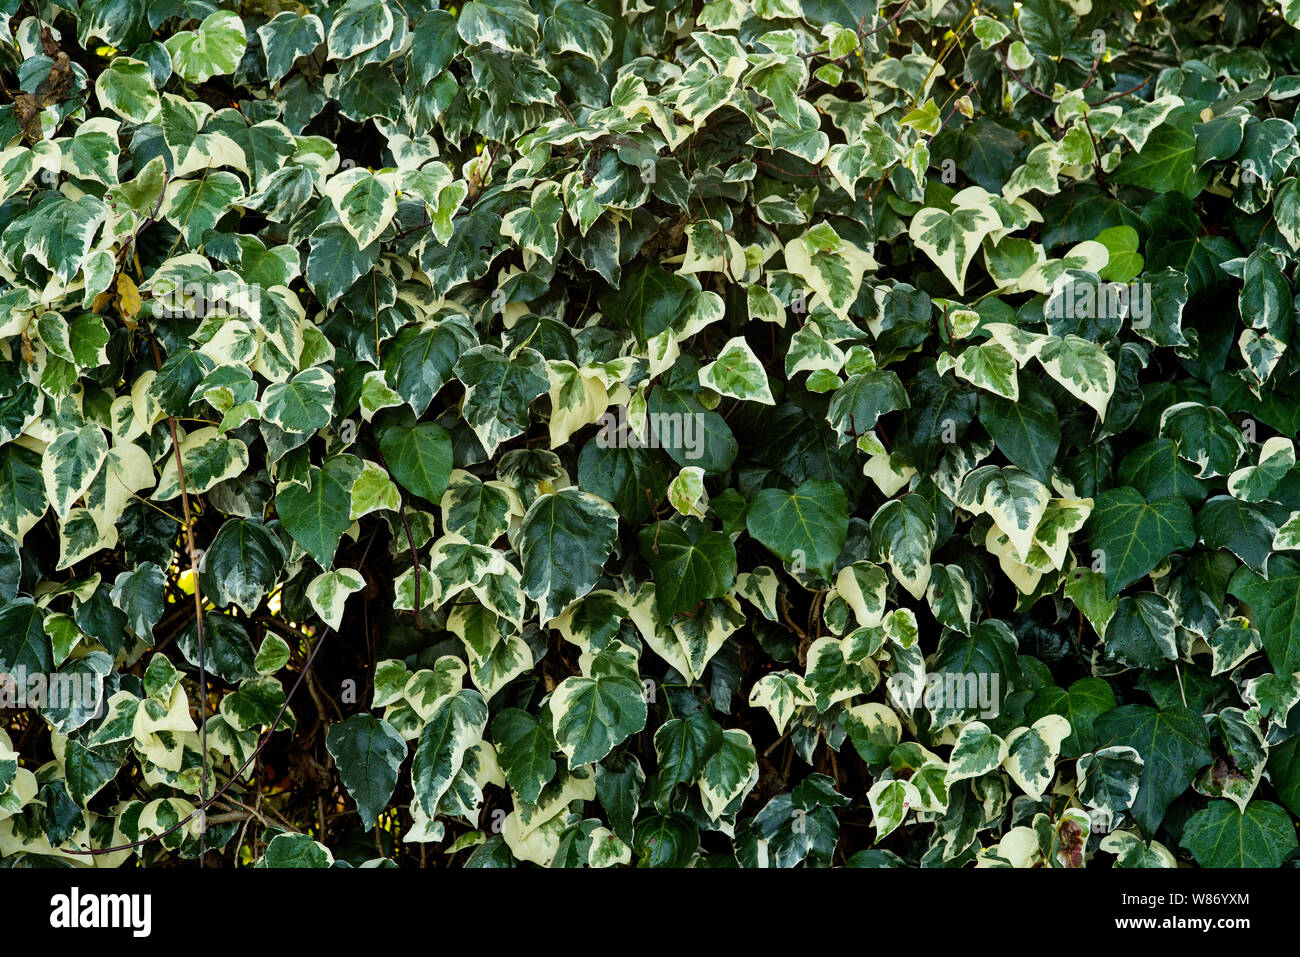 Ivy ( Hedera ) an evergreen option for ground cover or climbing a wall / fence to produce a textured green wall. Stock Photo